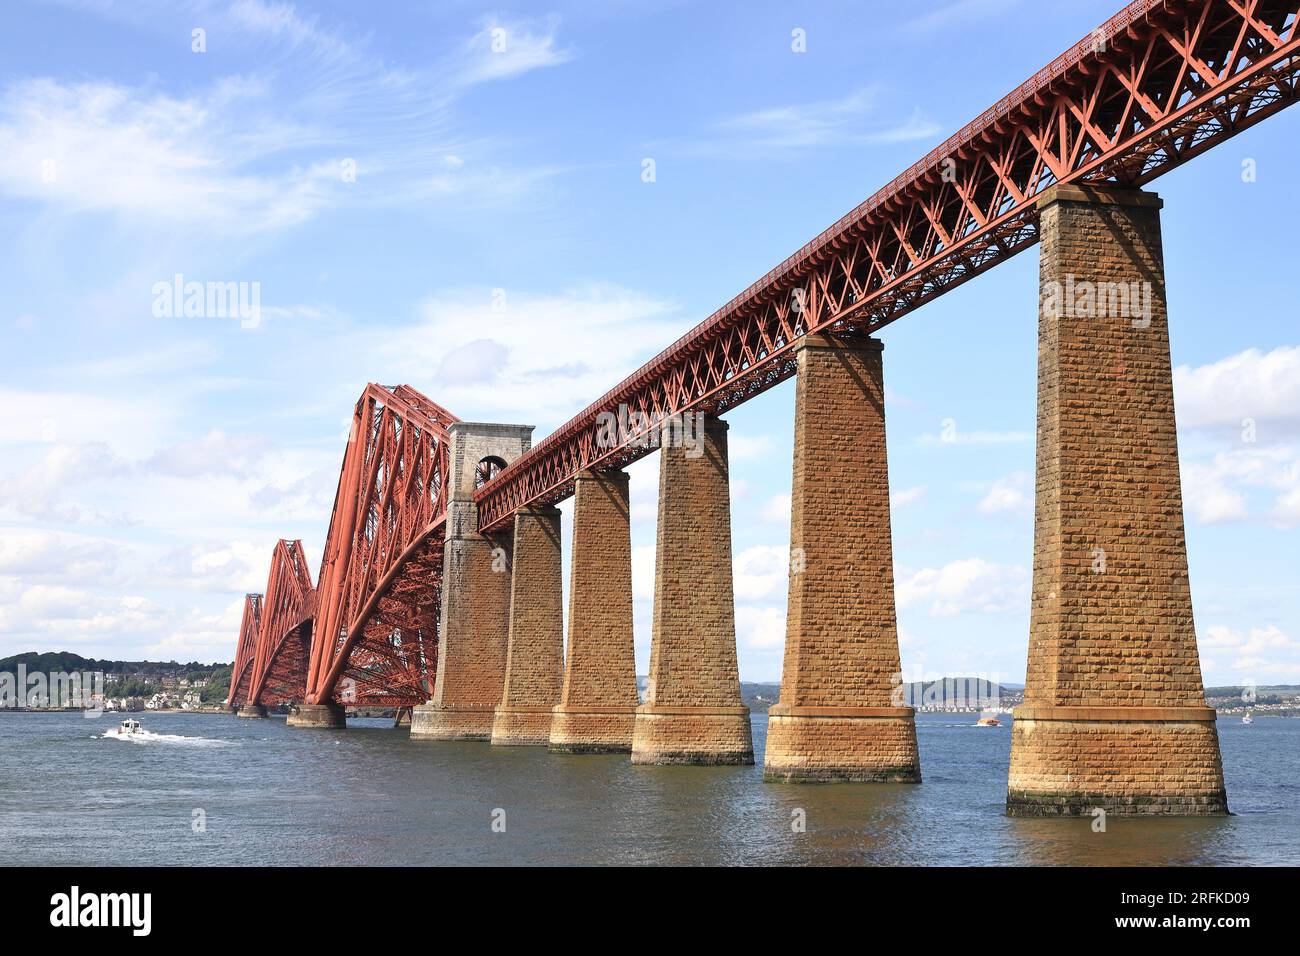 The view from South Queensferry in the east of Scotland towards the Forth Bridge.  The cantilever railway bridge crosses the Firth of Forth. Stock Photo